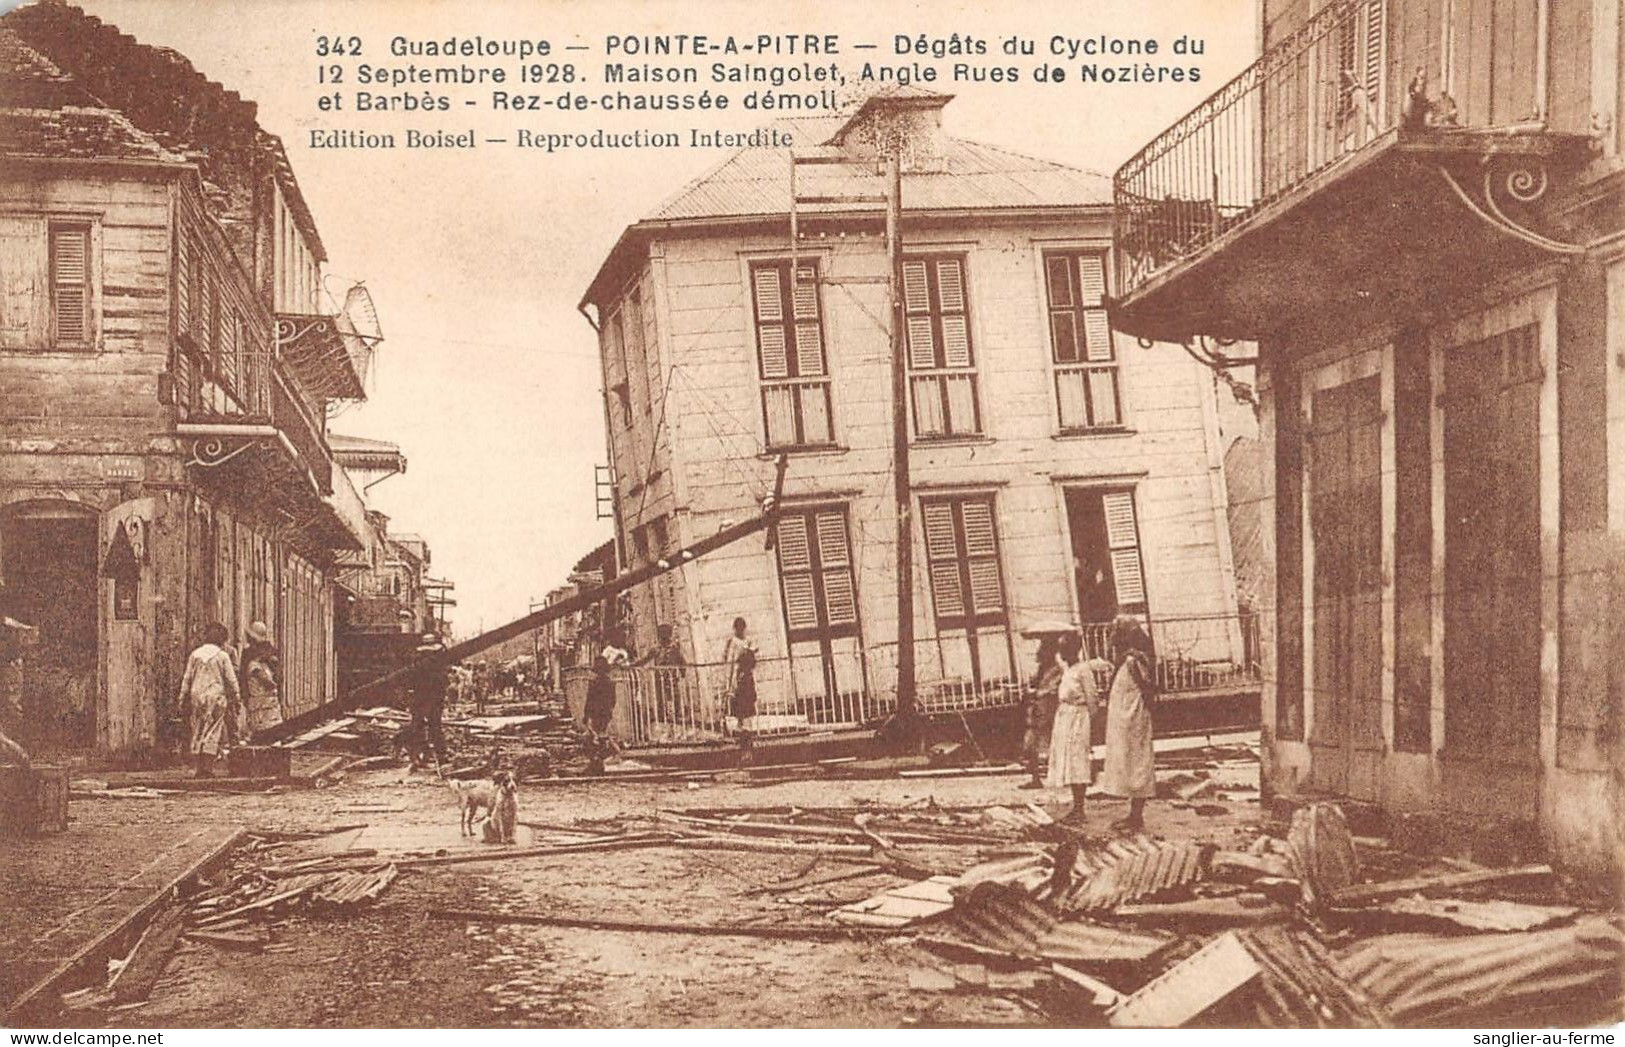 CPA GUADELOUPE POINTE A PITRE DEGATS DU CYCLONE 1928 MAISON SIGNOLET ANGLE RUES NOZIERES BARBES - Pointe A Pitre